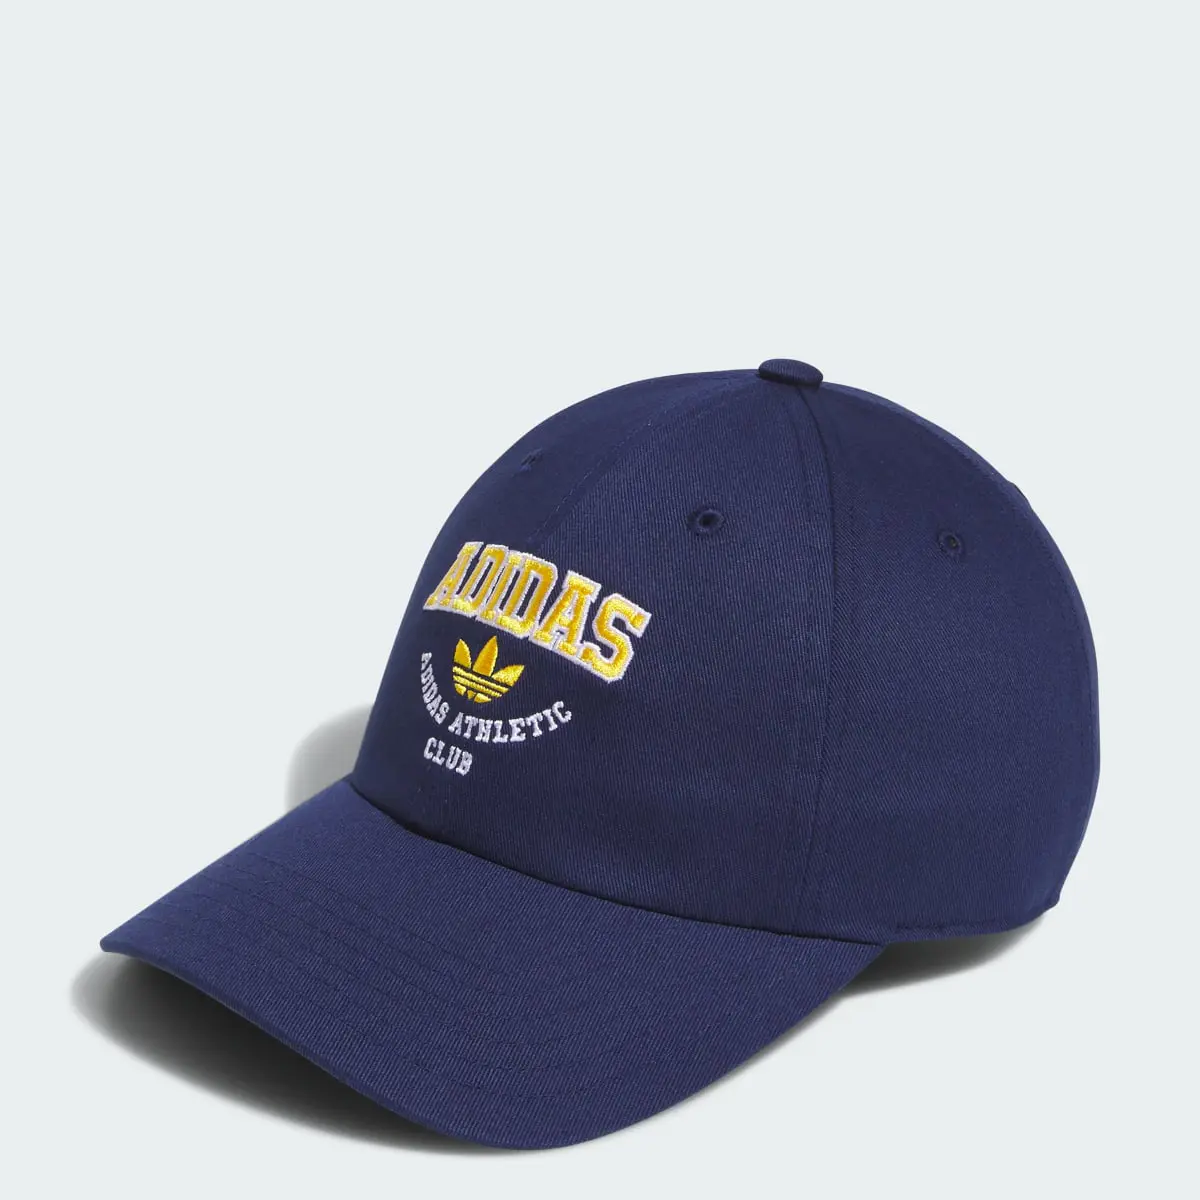 Adidas Collegiate Relaxed Strapback Hat. 1